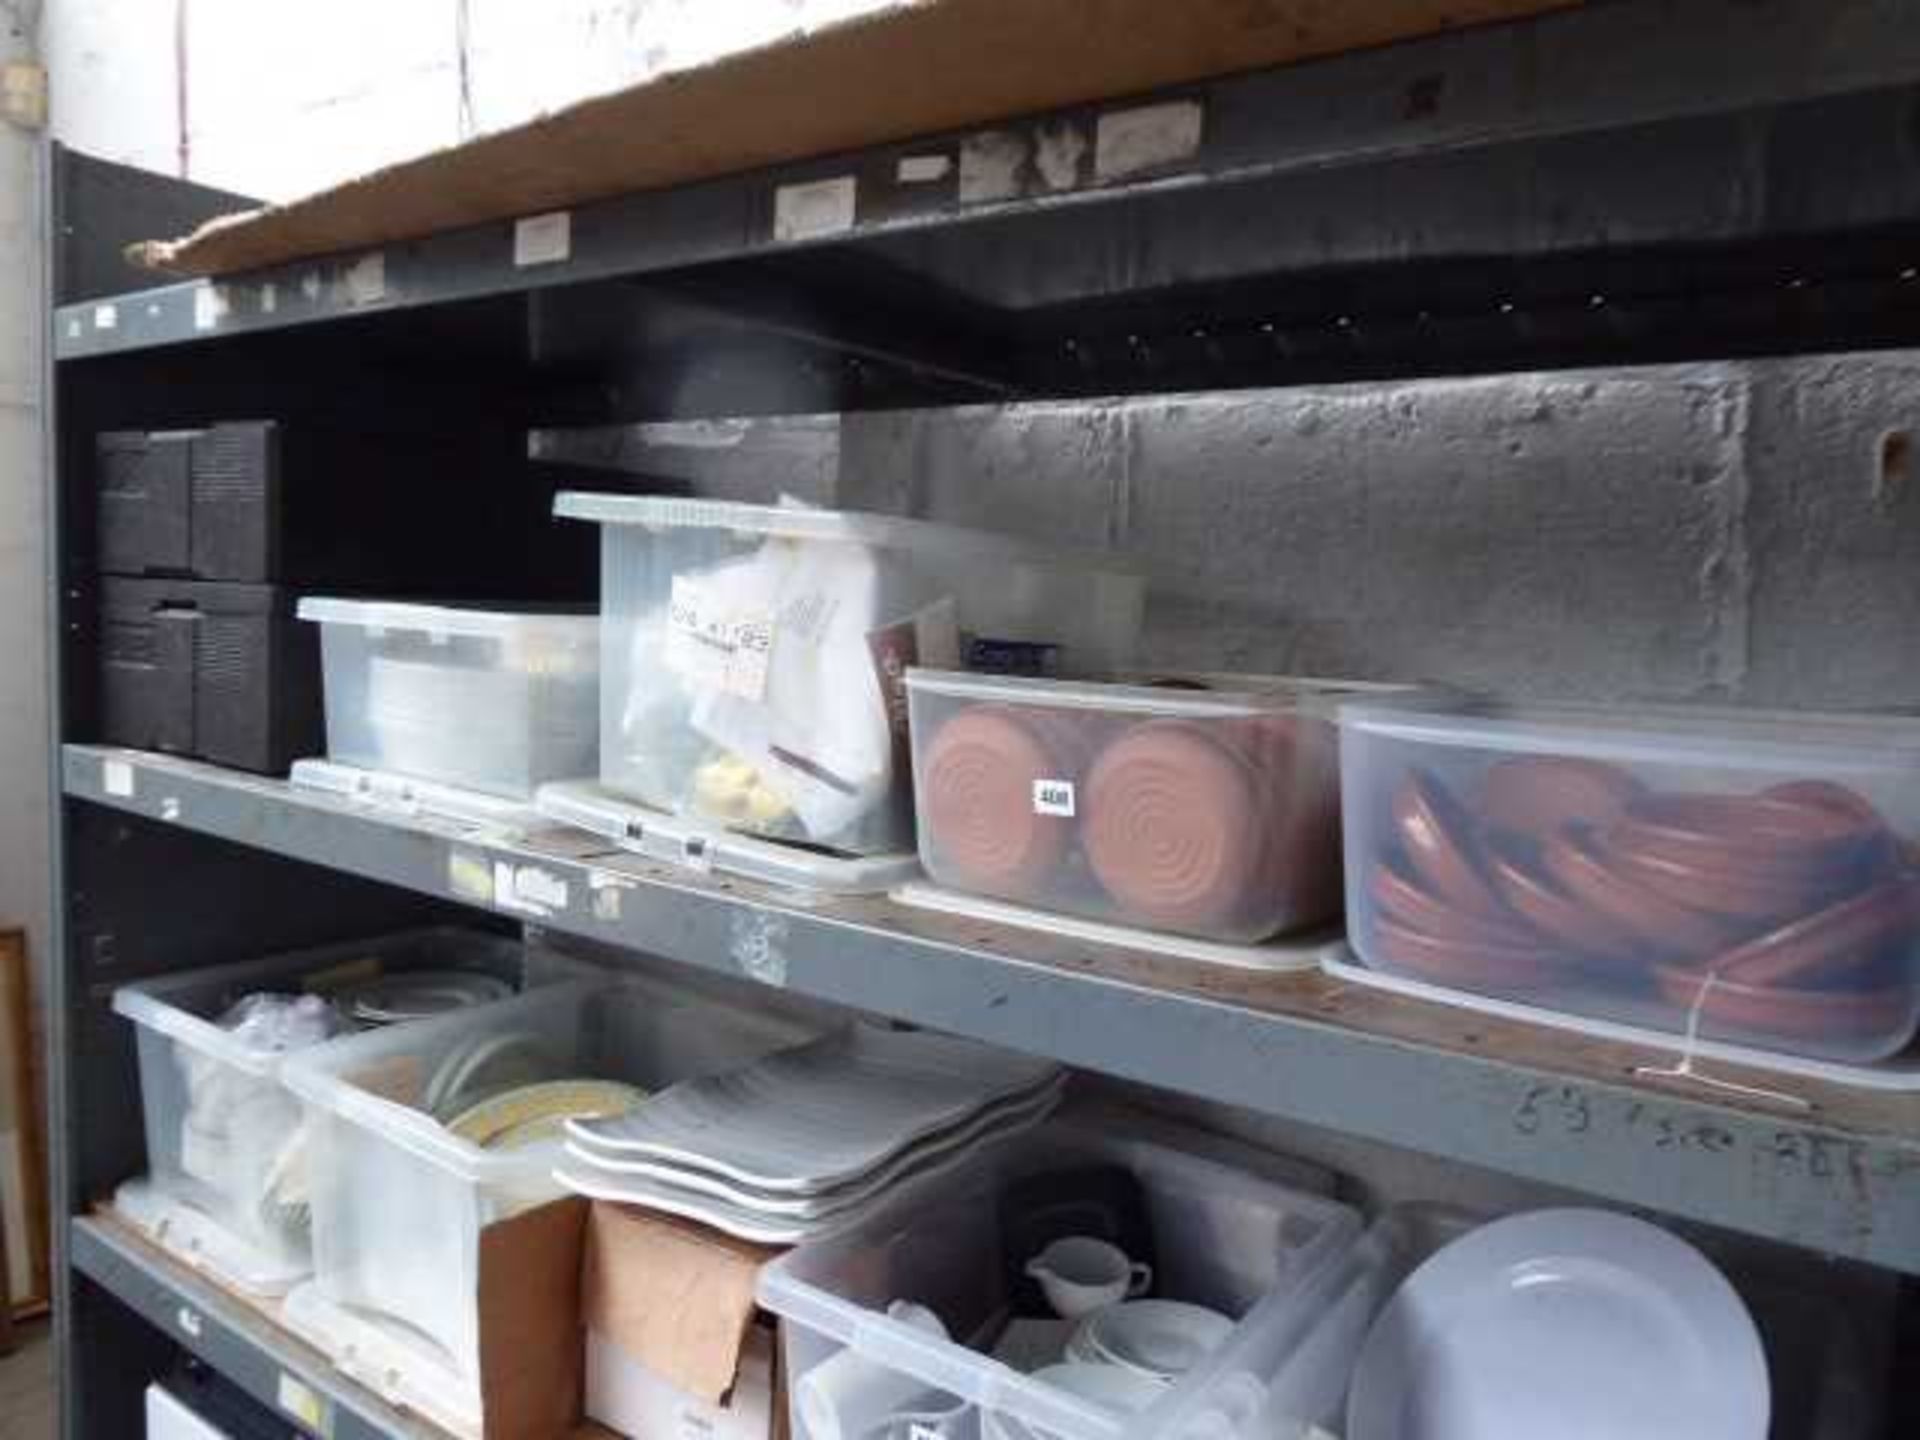 Shelf with 4 boxes of tapas type dishes, disposable containers, jugs, glassware, etc